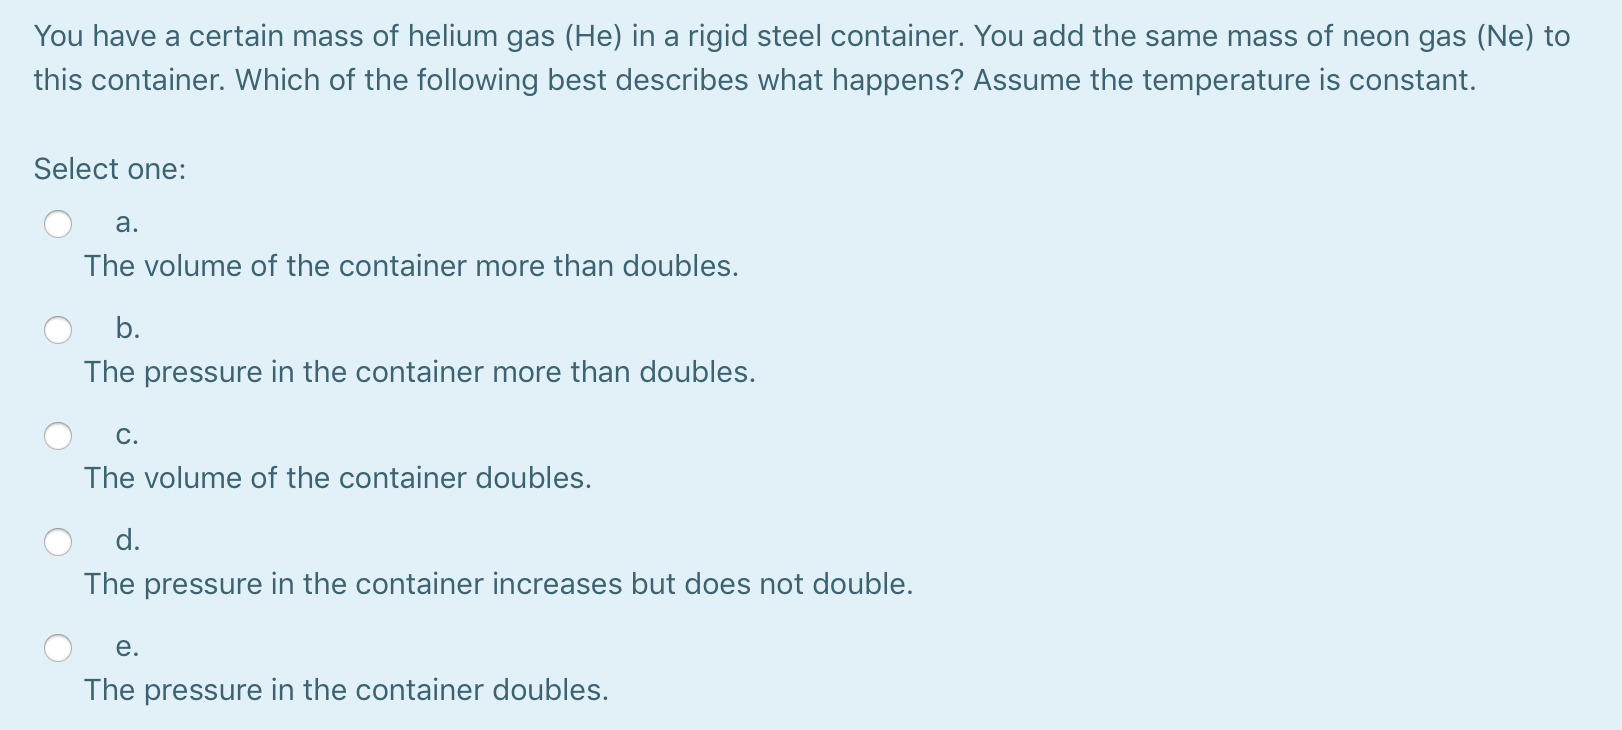 You have a certain mass of helium gas (He) in a rigid steel container. You add the same mass of neon gas (Ne) to
this container. Which of the following best describes what happens? Assume the temperature is constant.
Select one:
a.
The volume of the container more than doubles.
b.
The pressure in the container more than doubles.
C.
The volume of the container doubles.
d.
The pressure in the container increases but does not double.
e.
The pressure in the container doubles.
